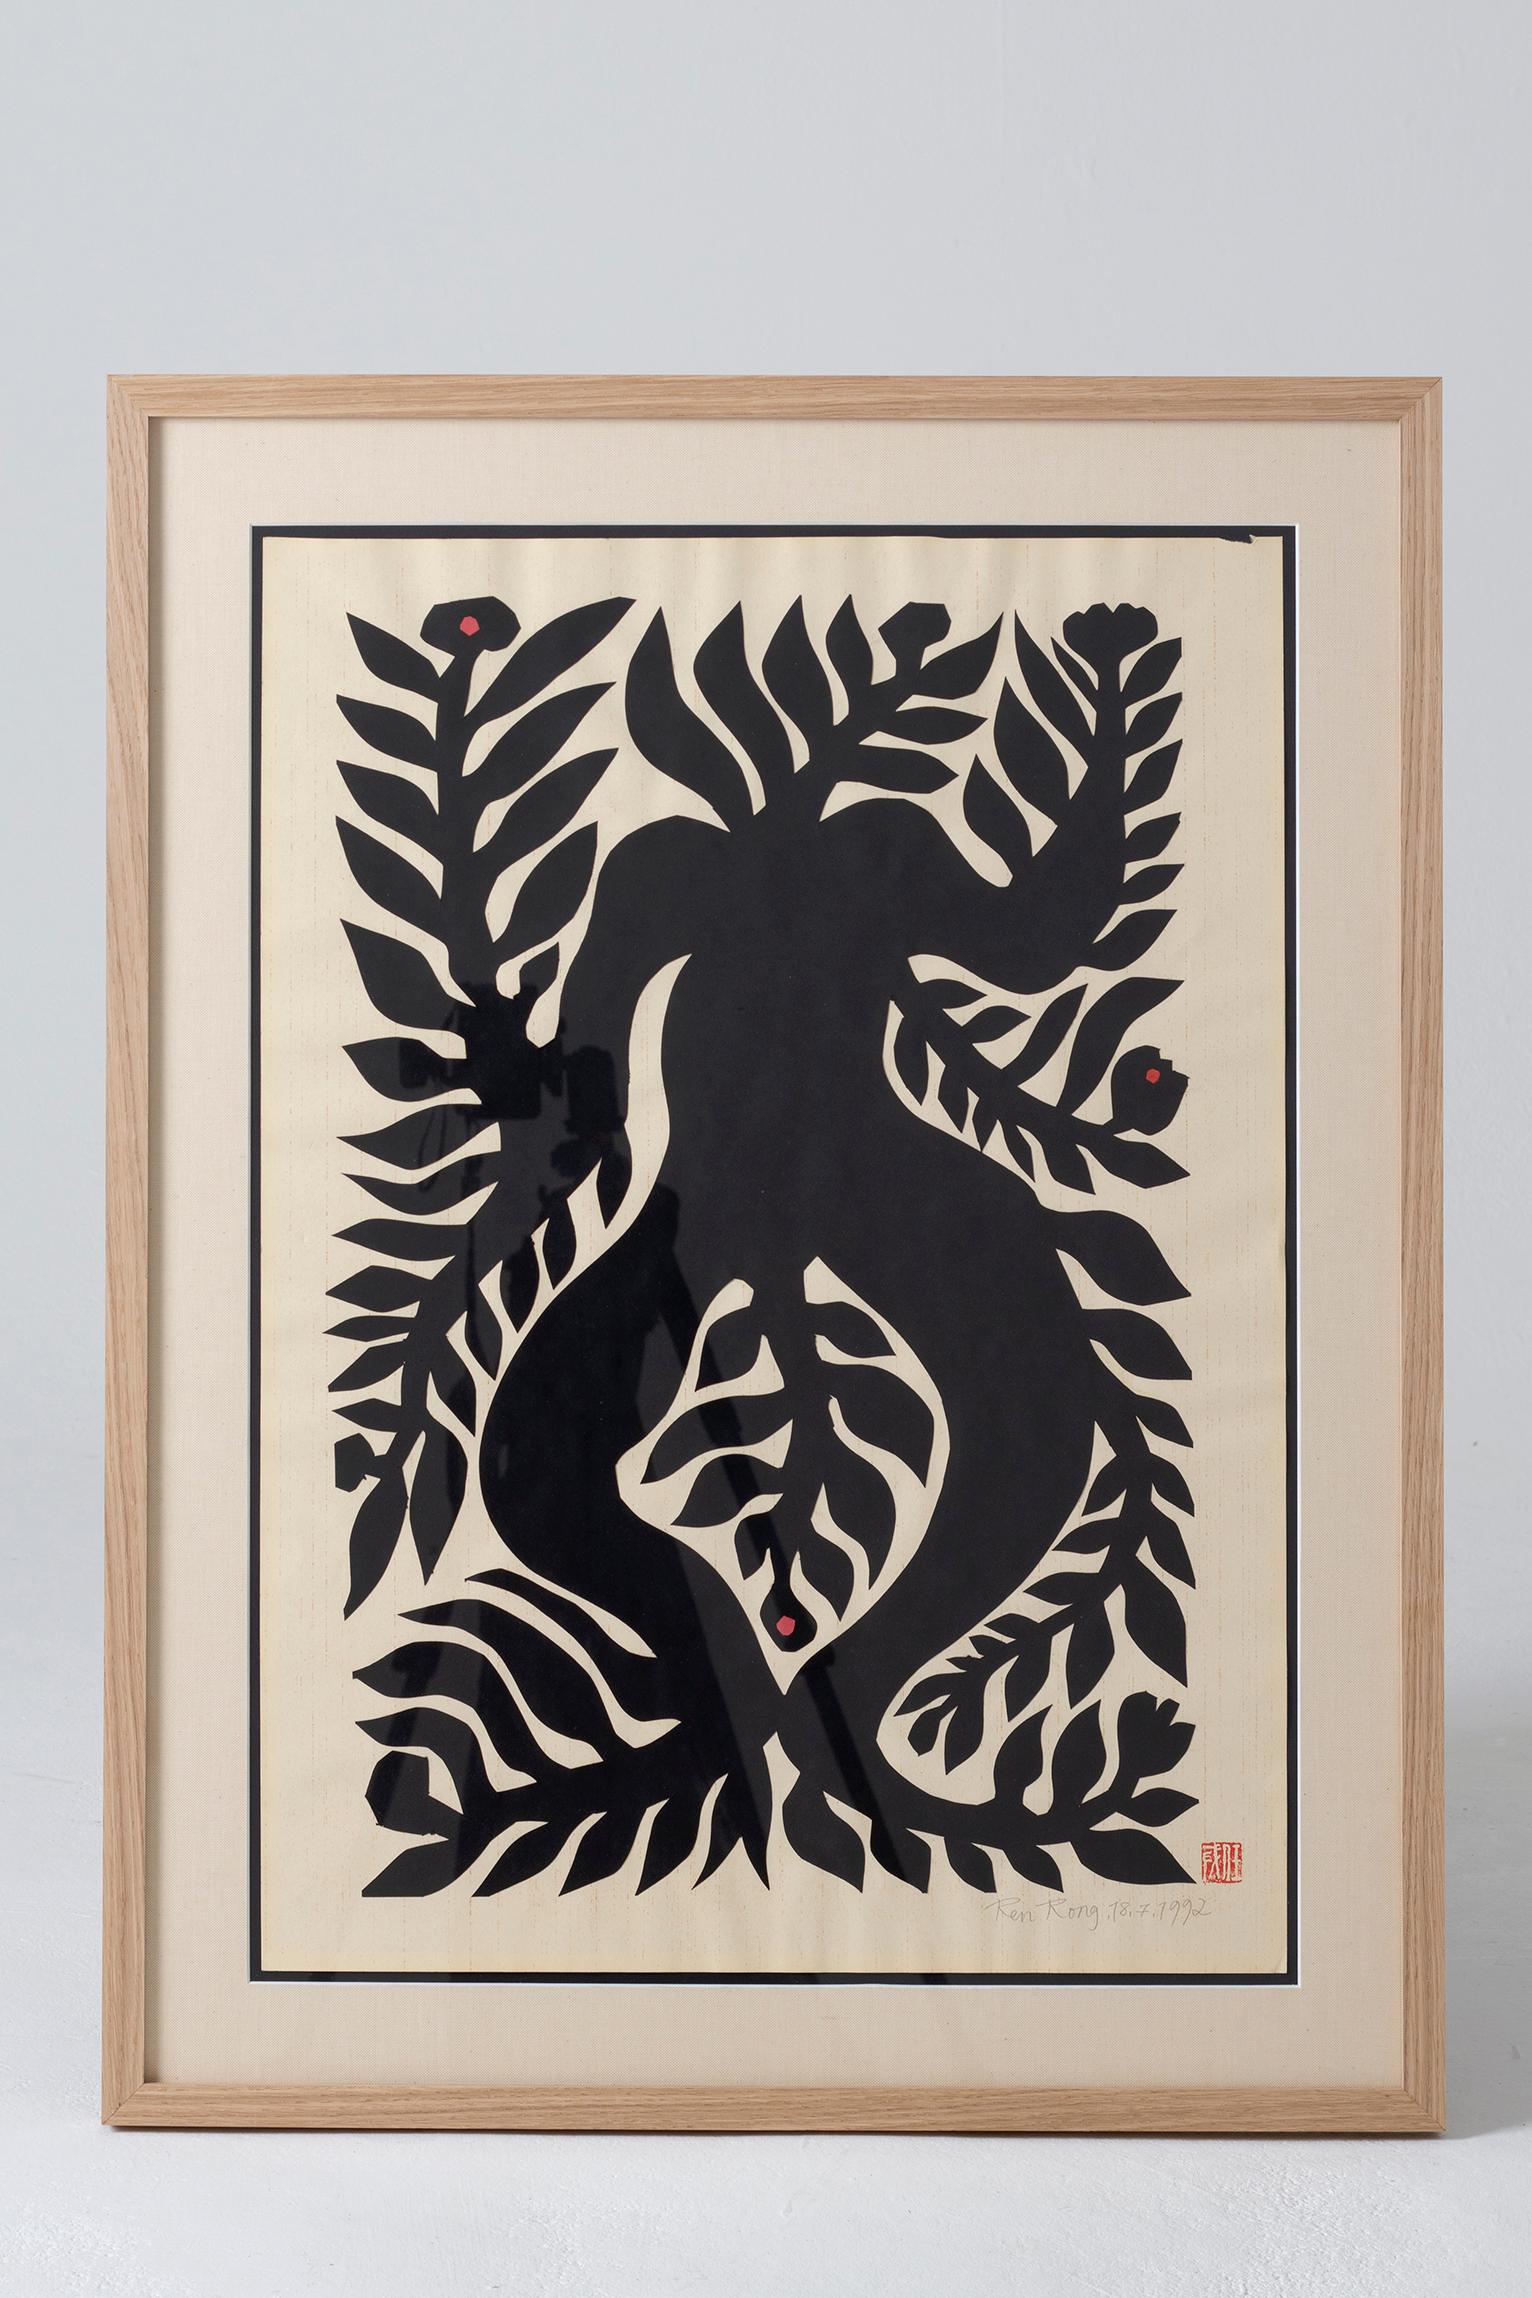 Ren Rong (Born 1960).
Original work of Art. 
Paper cut out. Signe and dated 1992.



Ren Rong (born 1960) studied at the Art Academy in his home town of Nanjing from 1982-1986. From 1989-1992, he studied at the Muenster and Dusseldorf Art